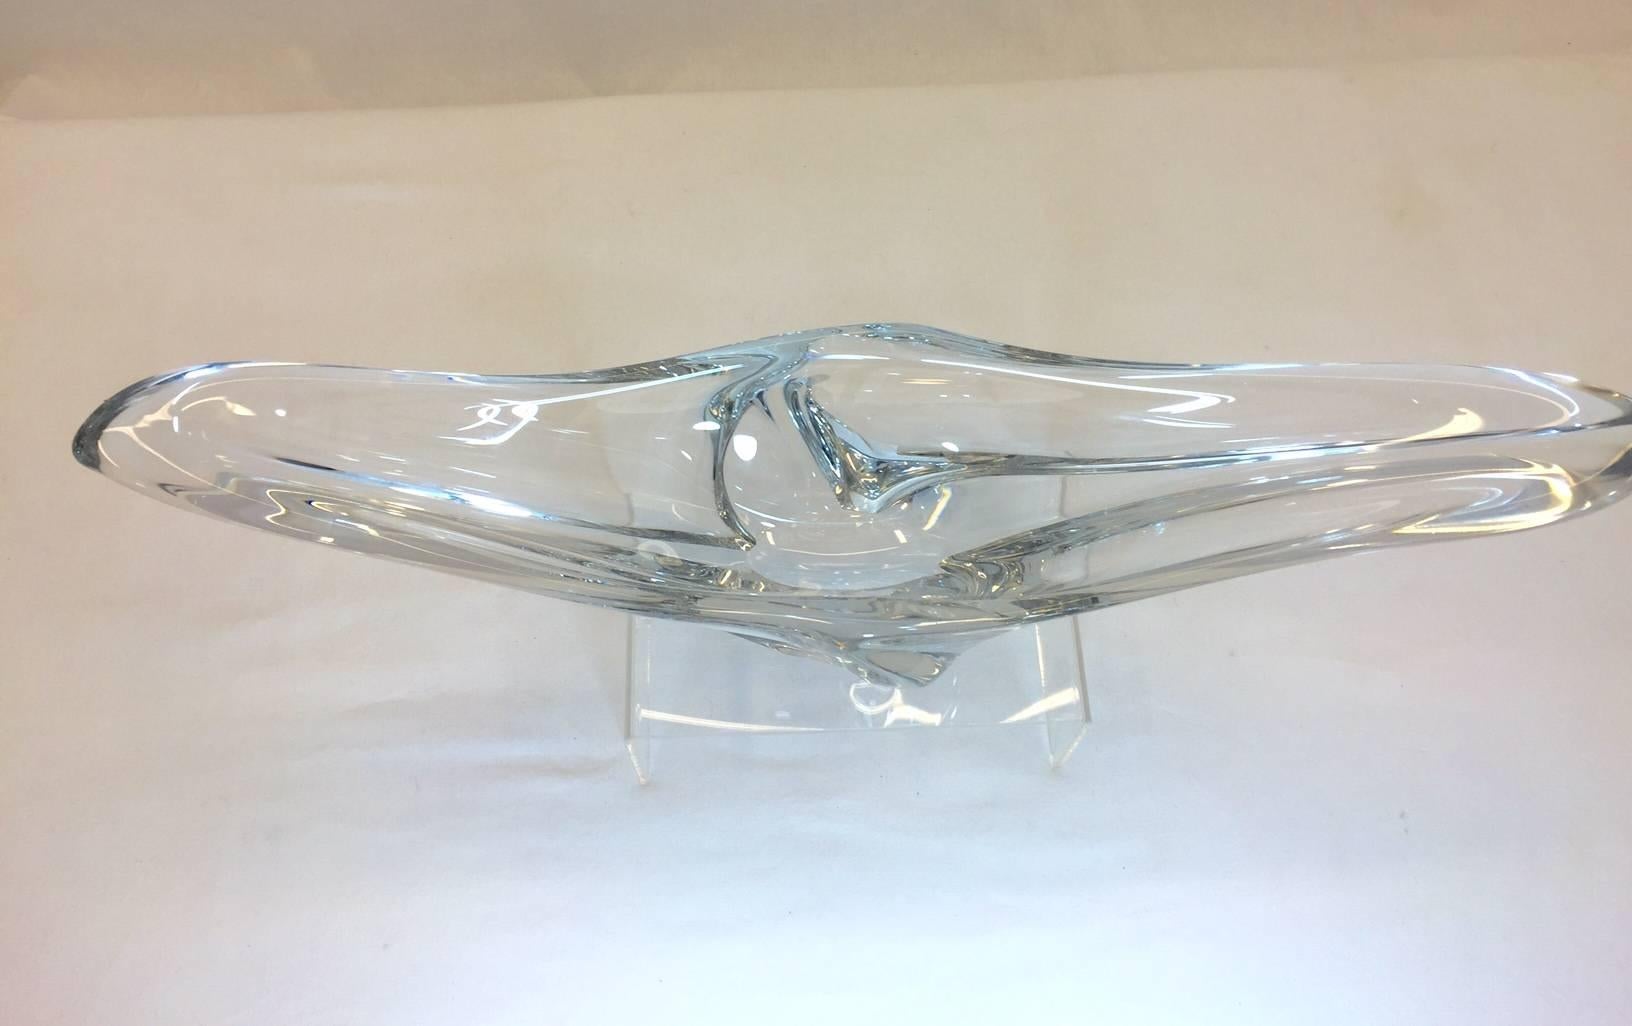 This is our second listing of a Daum, France centerpiece bowl, slightly larger than our other listing. The piece is very thick and heavy and very sculptural with an Art Deco feel. It is magnificent and is signed in etching, as are all the Daum